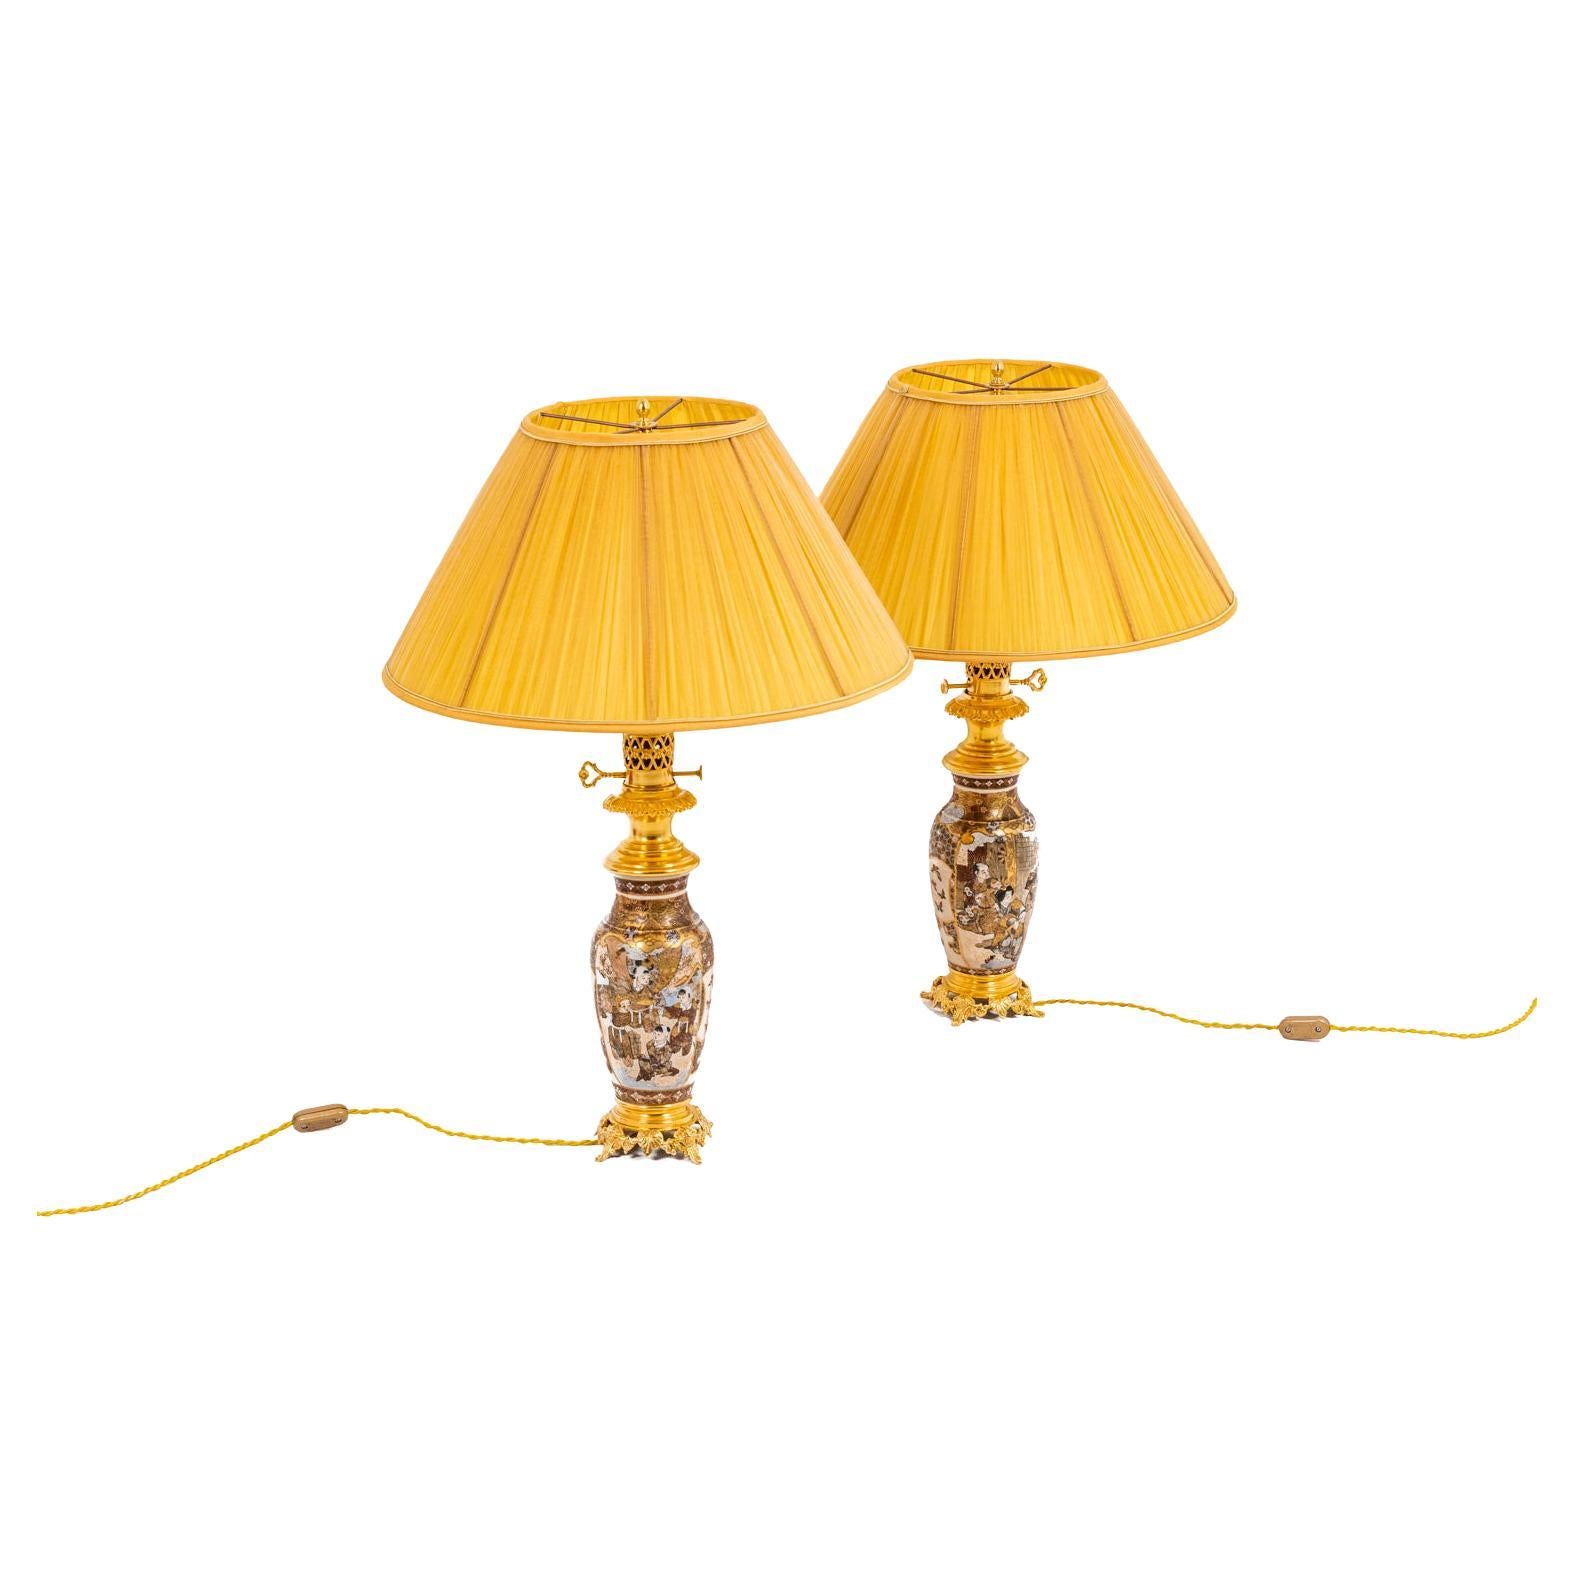 Pair of Lamps in Satsuma Earthenware and Gilt Bronze, circa 1880 For Sale